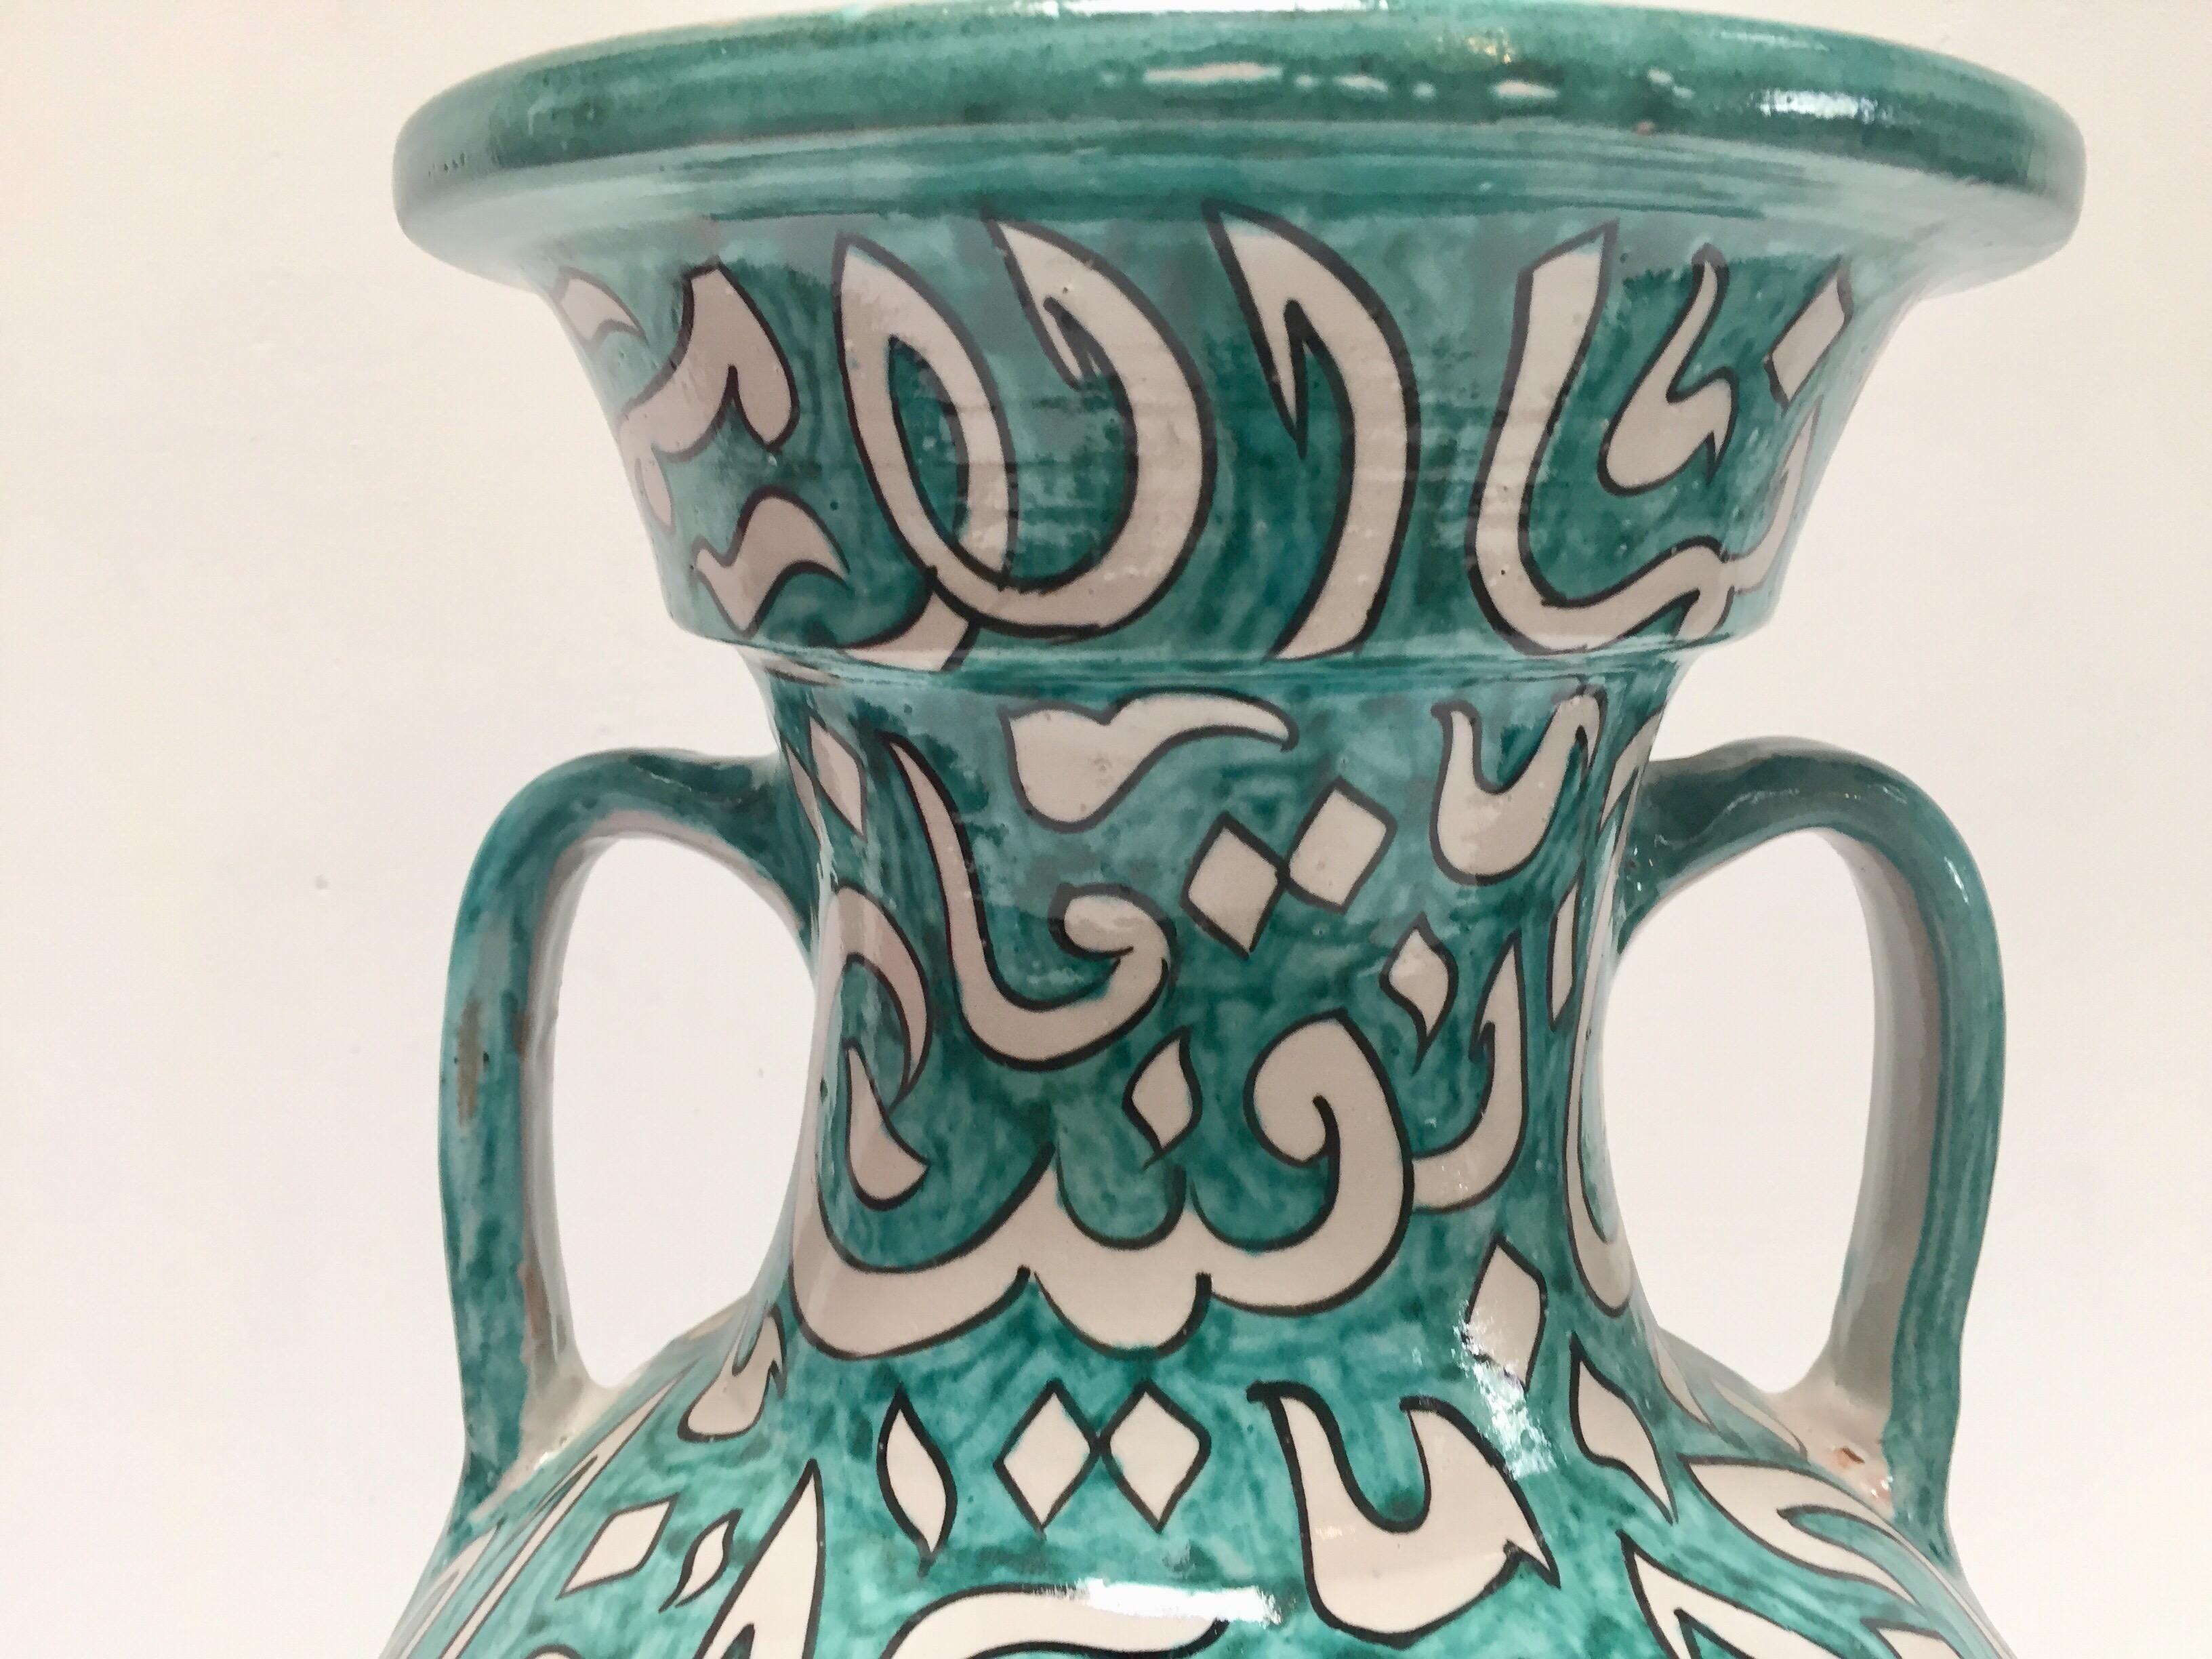 Hand-Crafted Large Moroccan Glazed Ceramic Vase with Arabic Calligraphy Turquoise Writing Fez For Sale